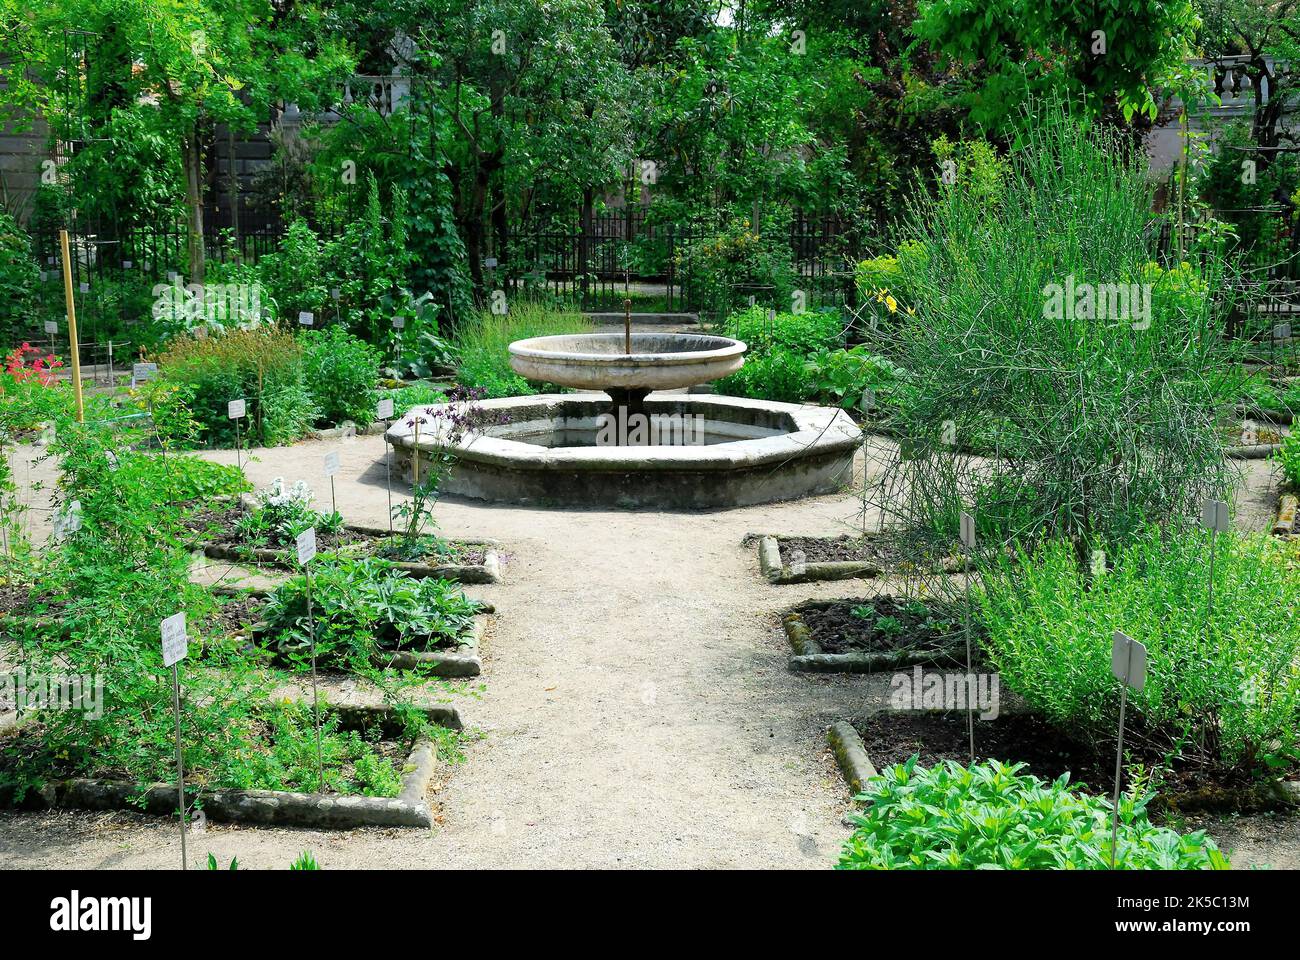 The University of Padua Botanical Garden. The Botanical Garden of the University of Padua was established in 1545 for the cultivation of medicinal plants. A fountain. Stock Photo